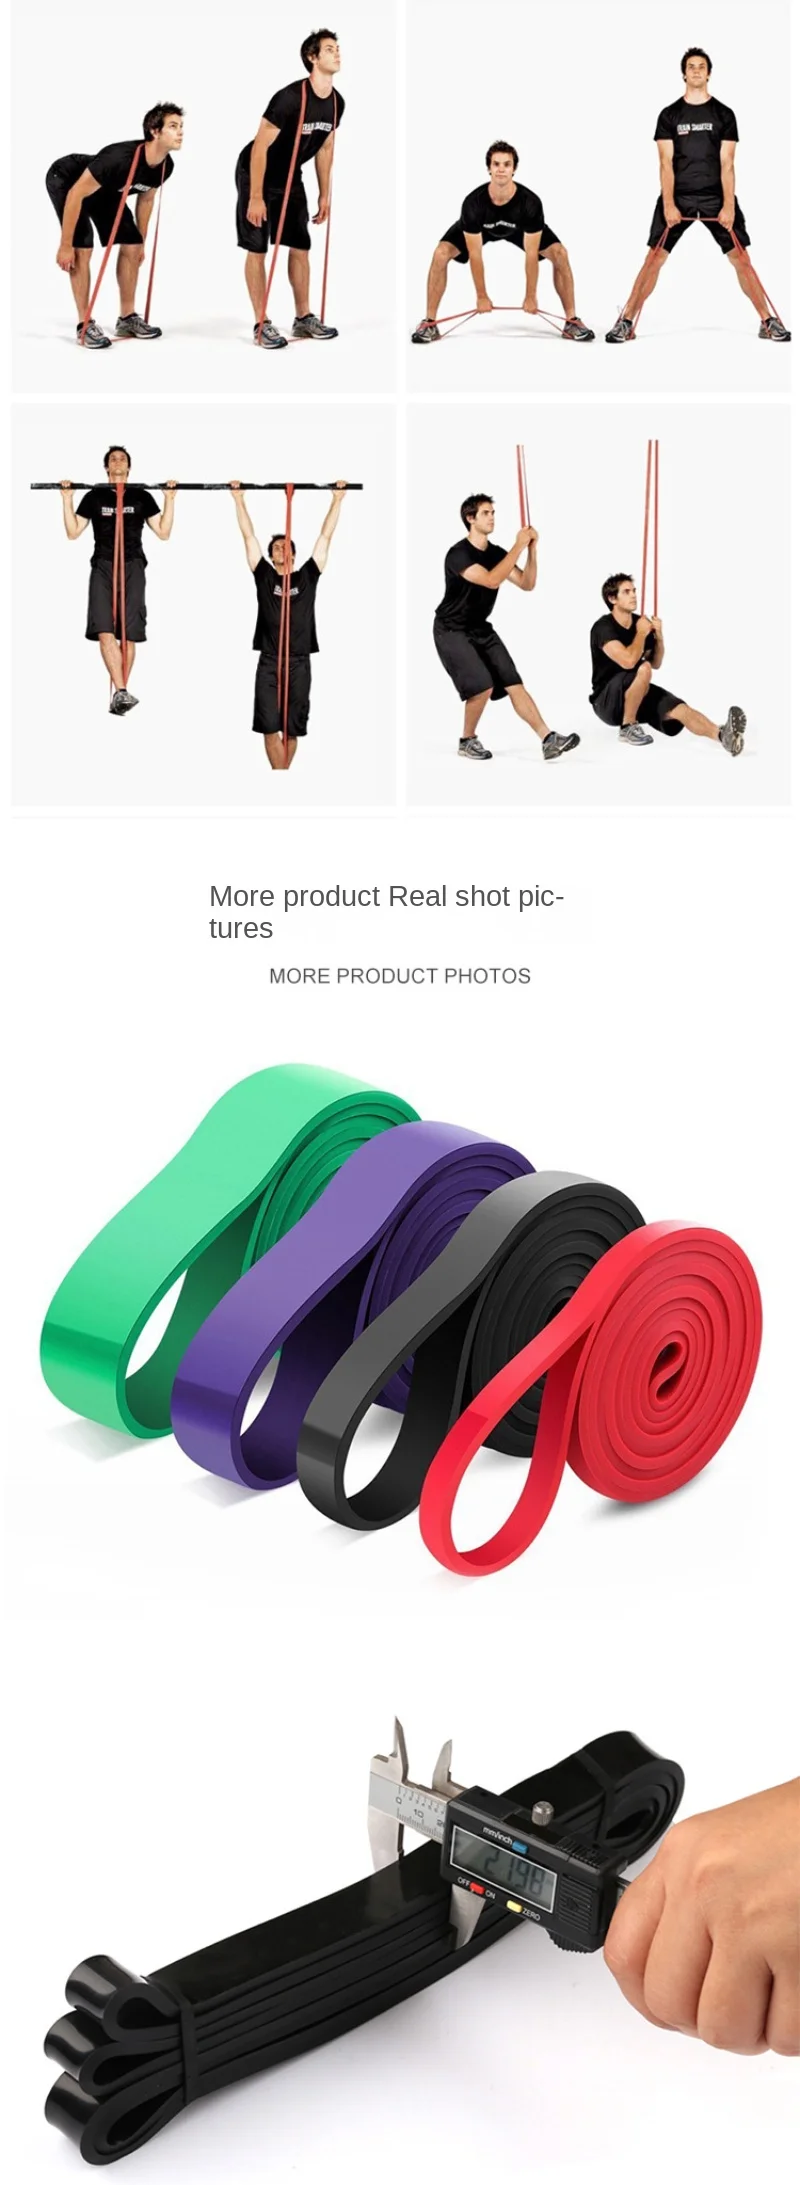 Sc1568eff74fb408081326182447f8bc6k Resistance Bands Exercise Elastic Natural latex Workout Ruber Loop Strength rubber band gym Fitness Equipment Training Expander